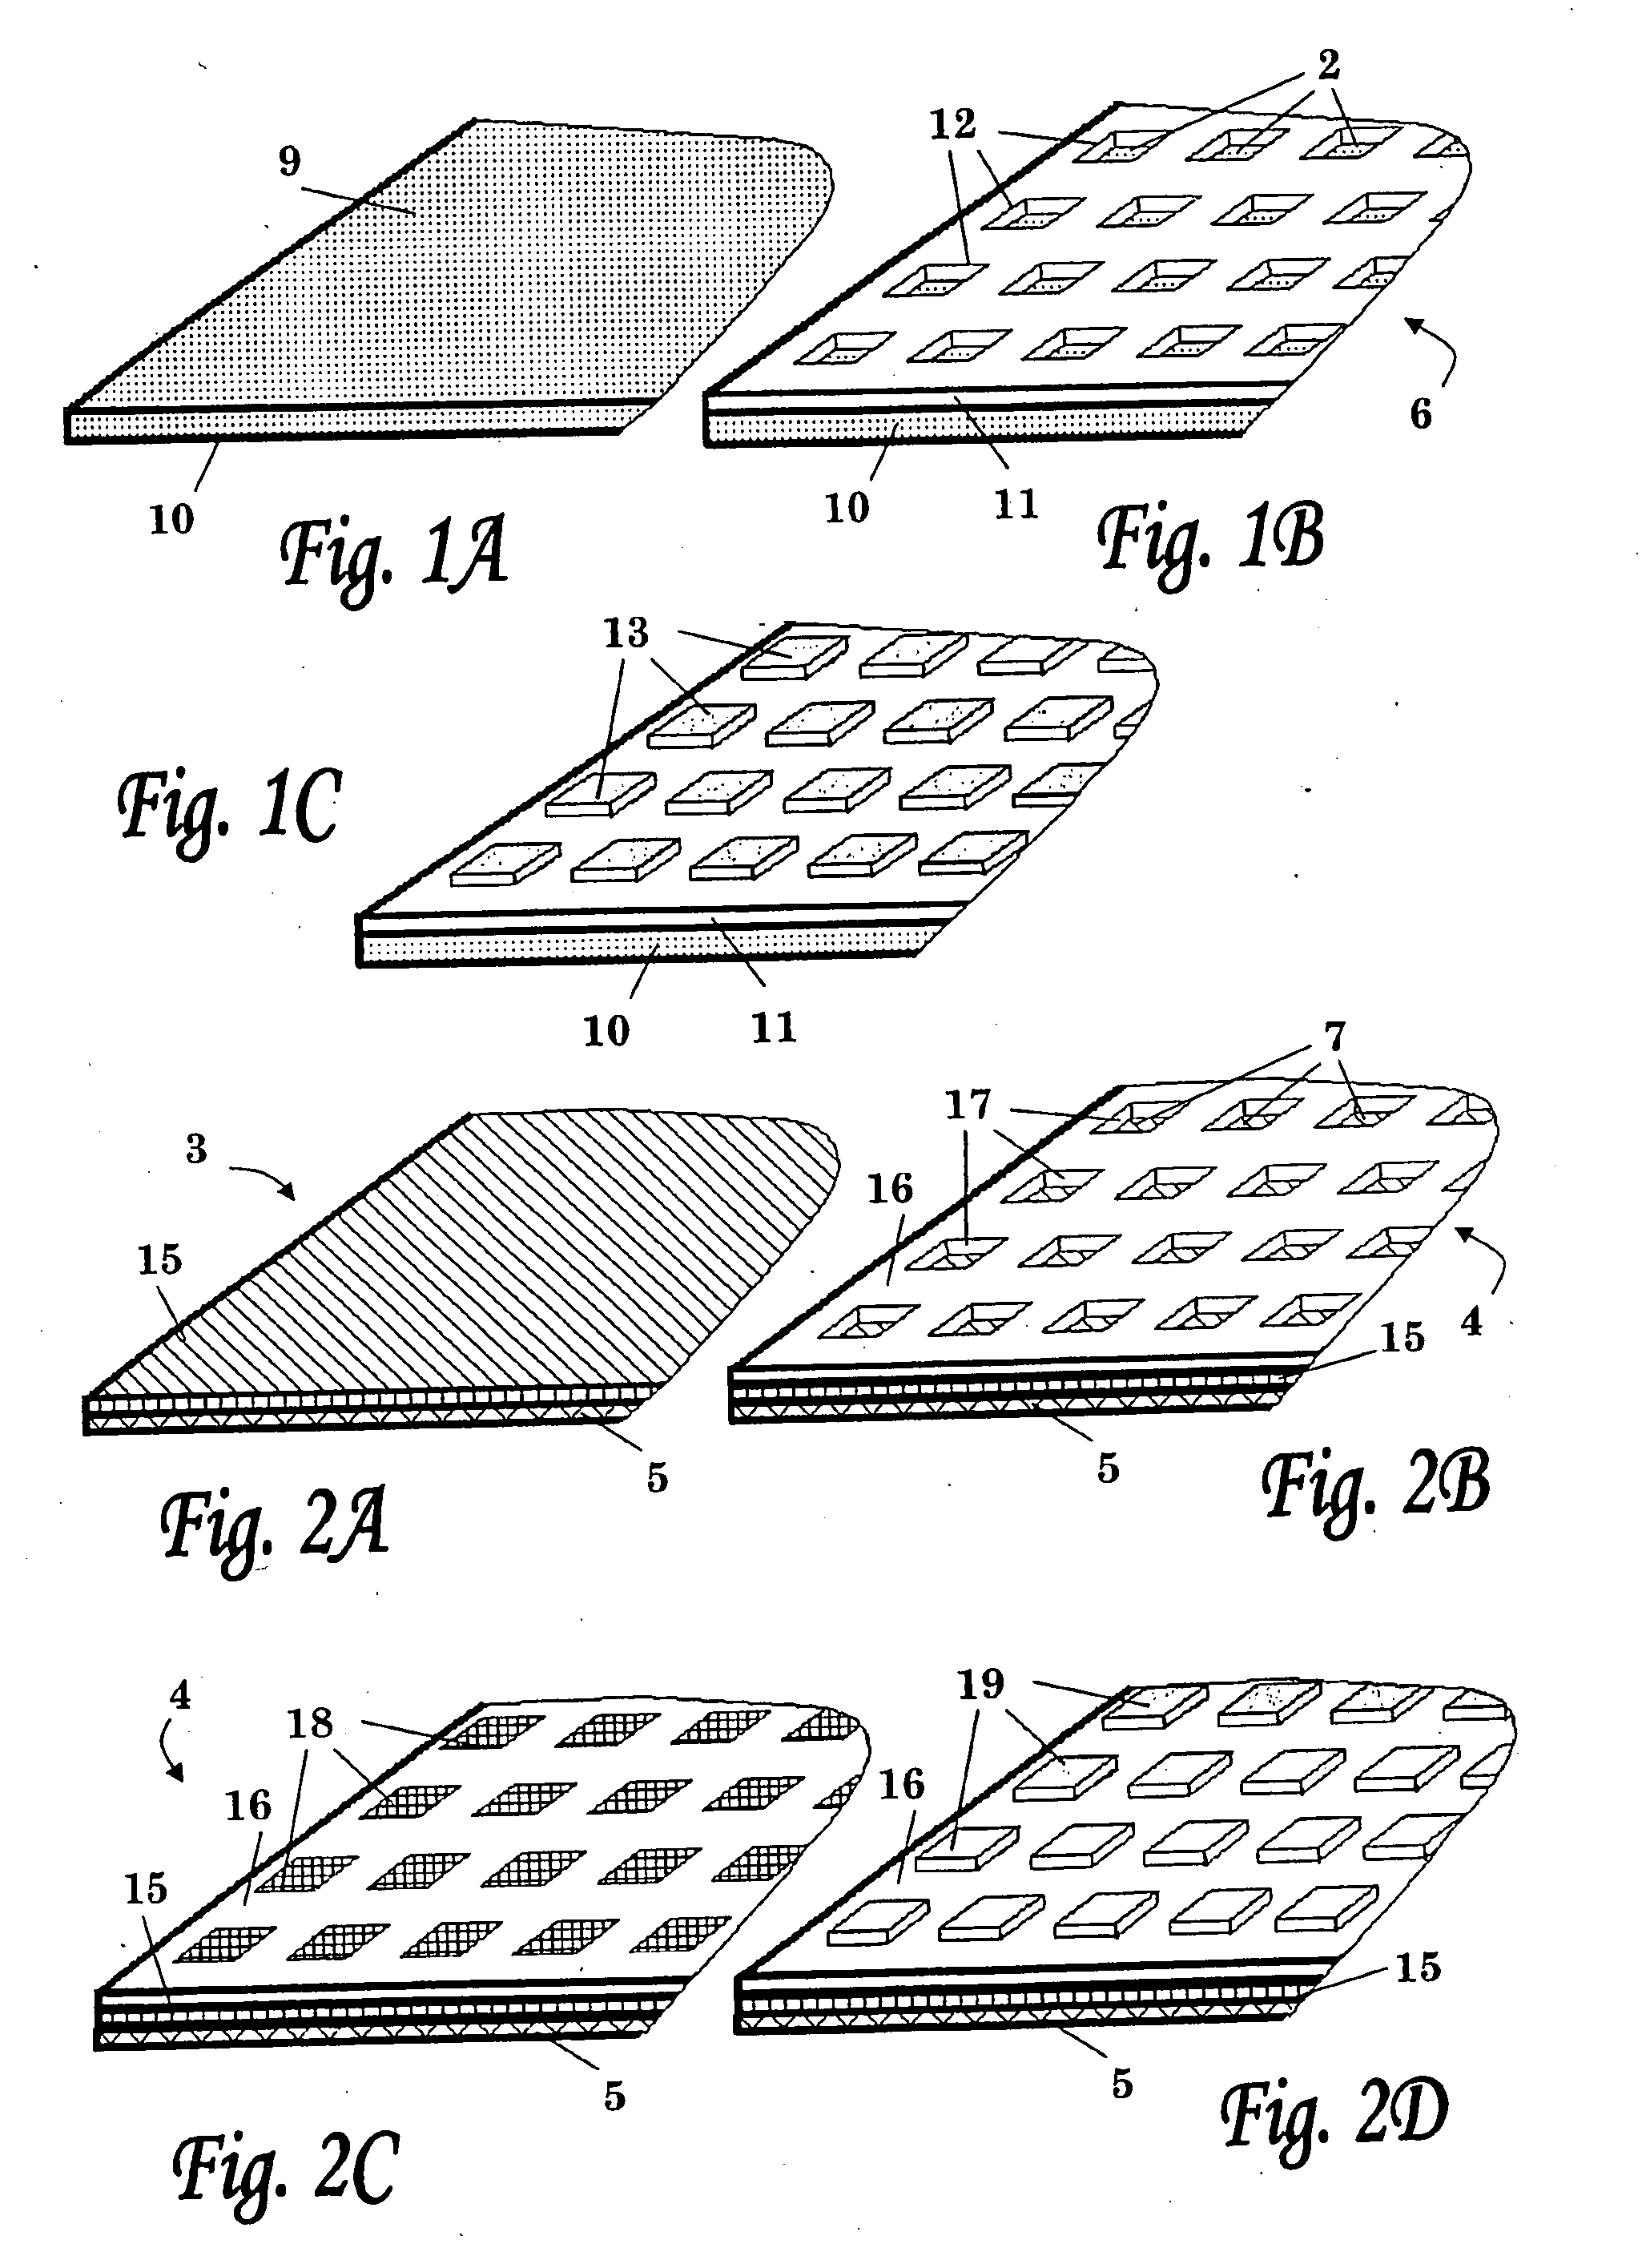 Multilayered Electrochemical Energy Storage Device and Method of Manufacture Thereof